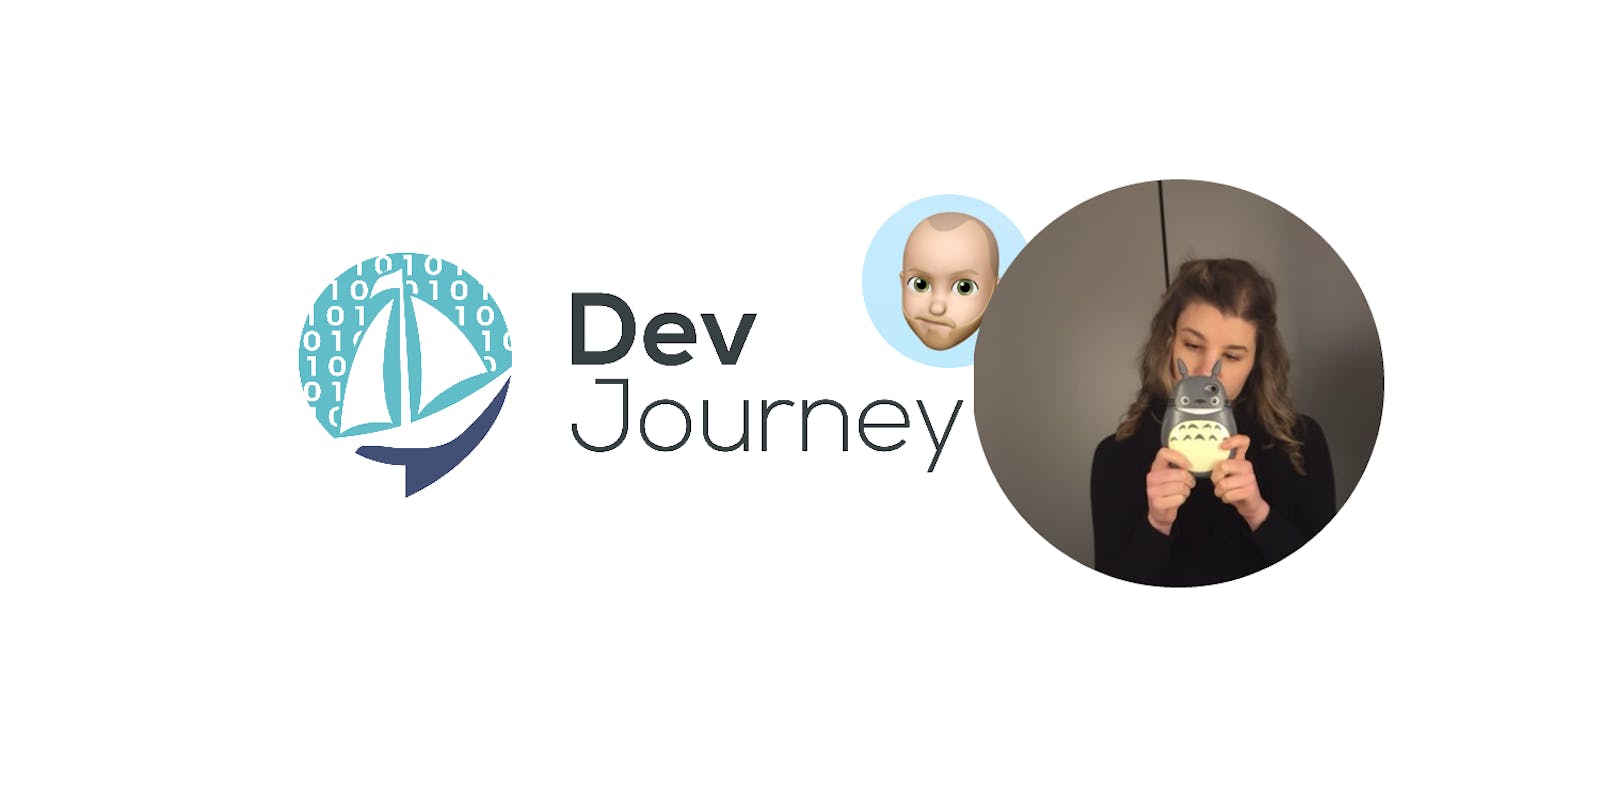 Carolyn Stransky learning her way from journalist to developer and back... and other things I learned recording her DevJourney